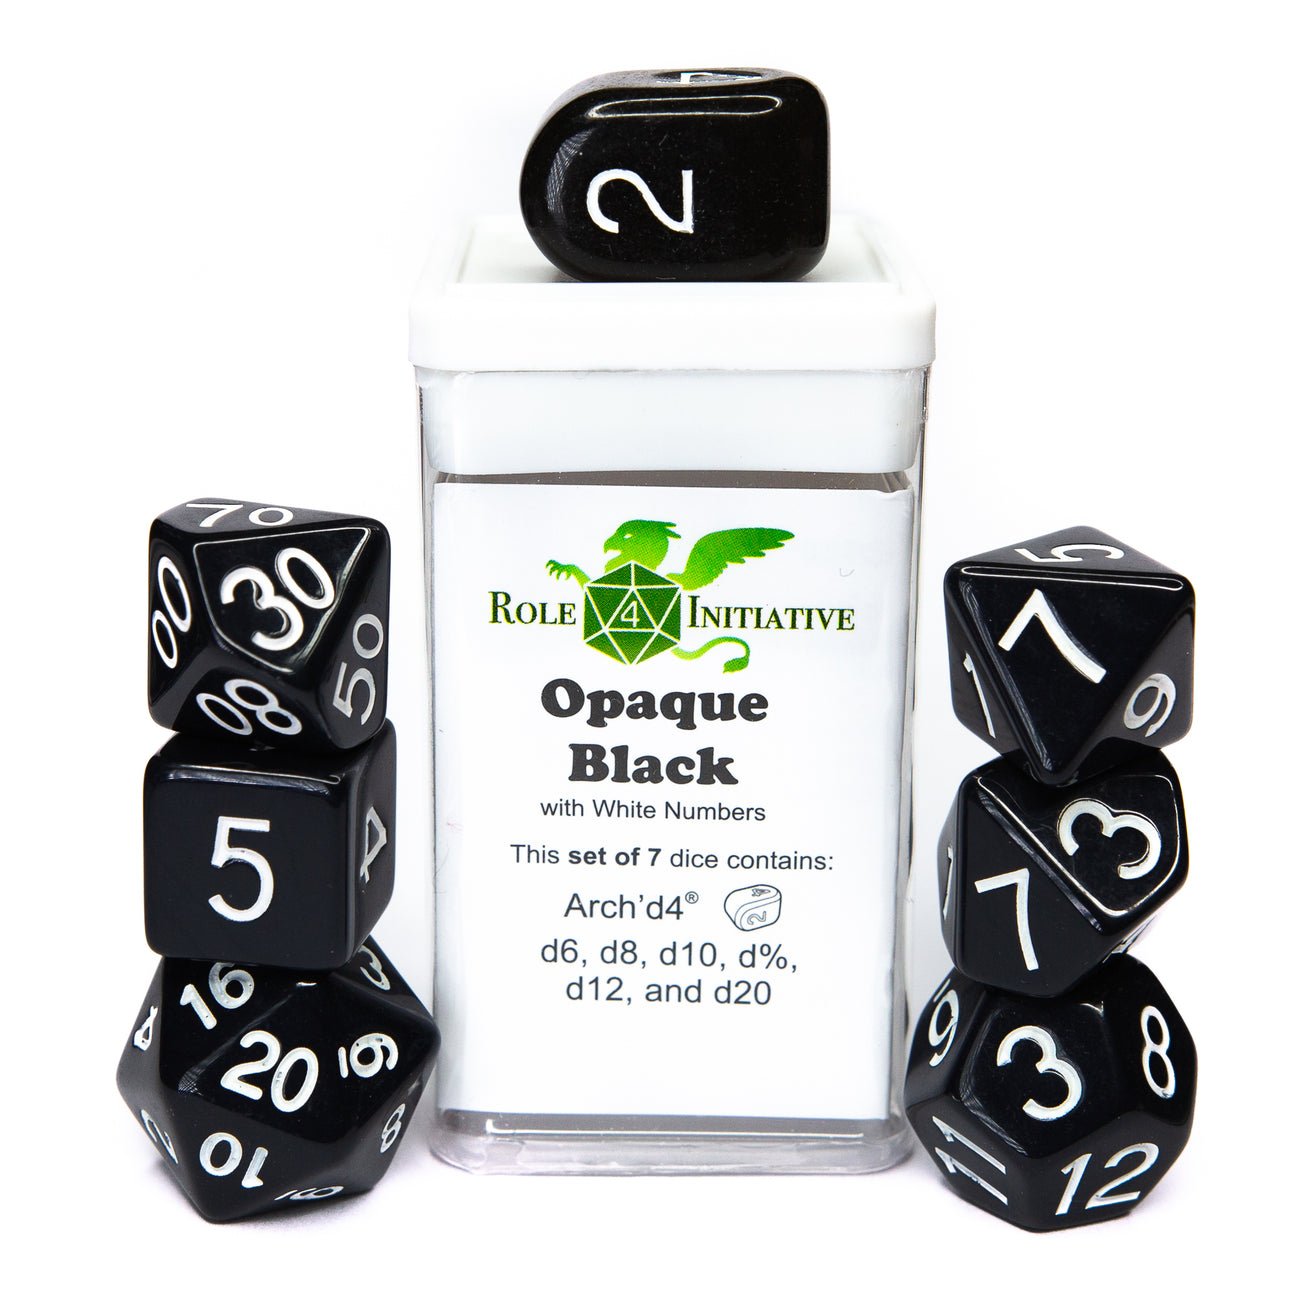 Opaque Black - 7 dice set (with Arch’d4™) - The Fourth Place